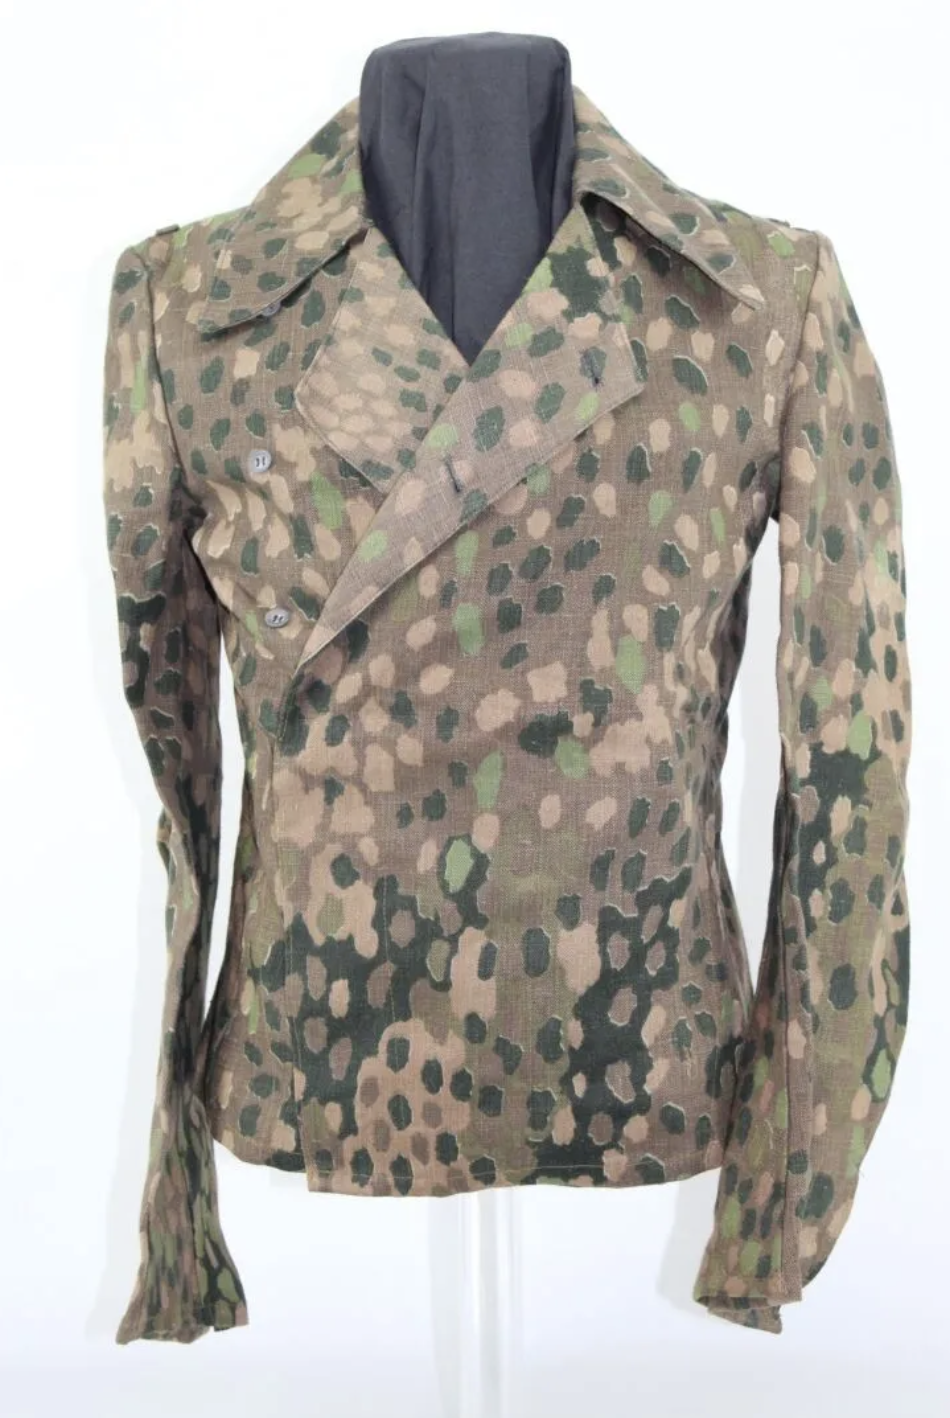 SS Panzer Camouflage wrap-over Tunic